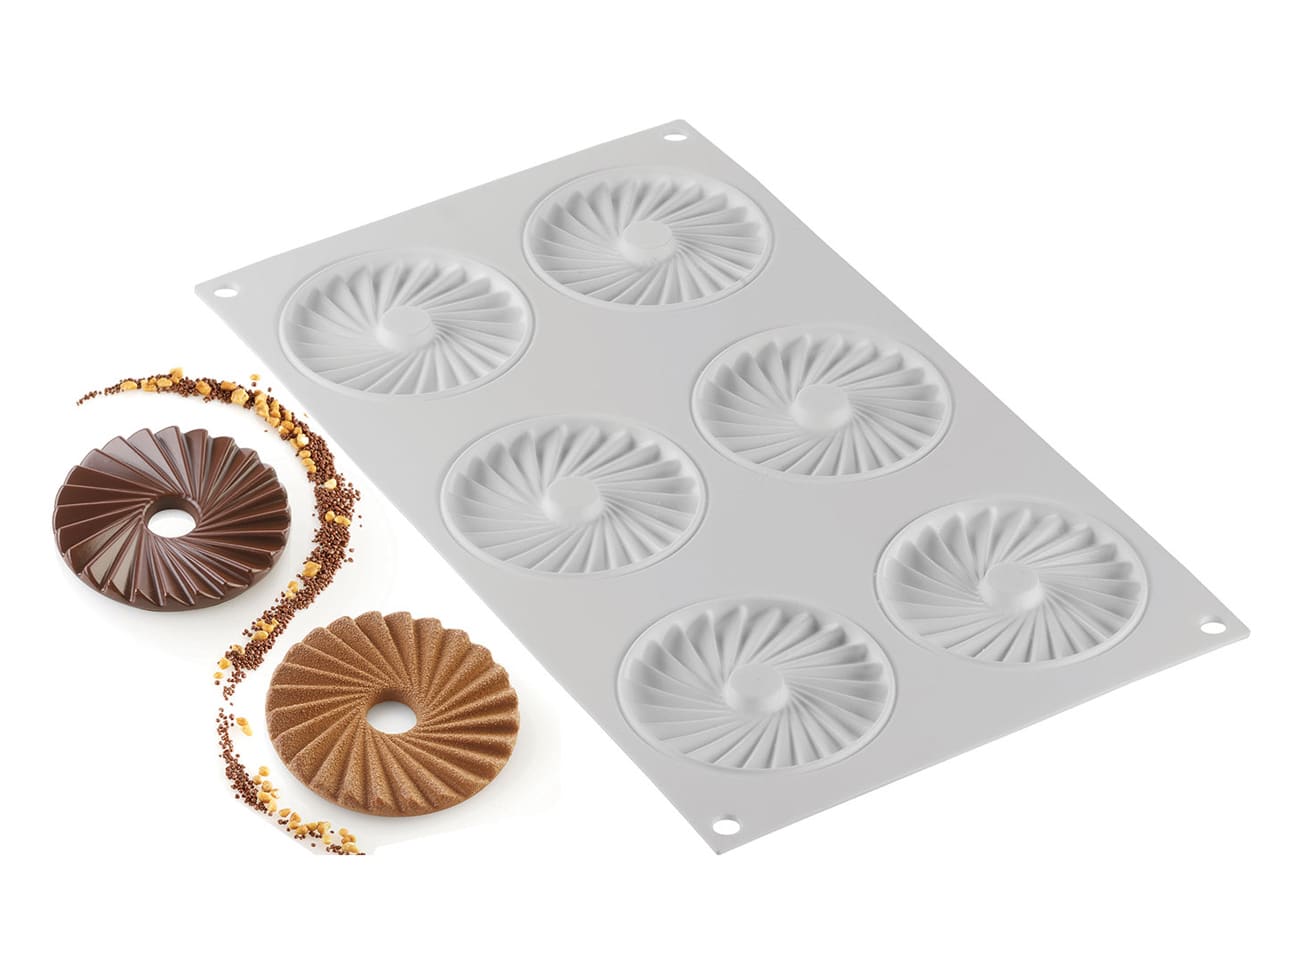 Silikomart SF077 SiliconFLEX 6 Compartment Rose Silicone Baking Mold - 3 x  3 x 1 9/16 Cavities